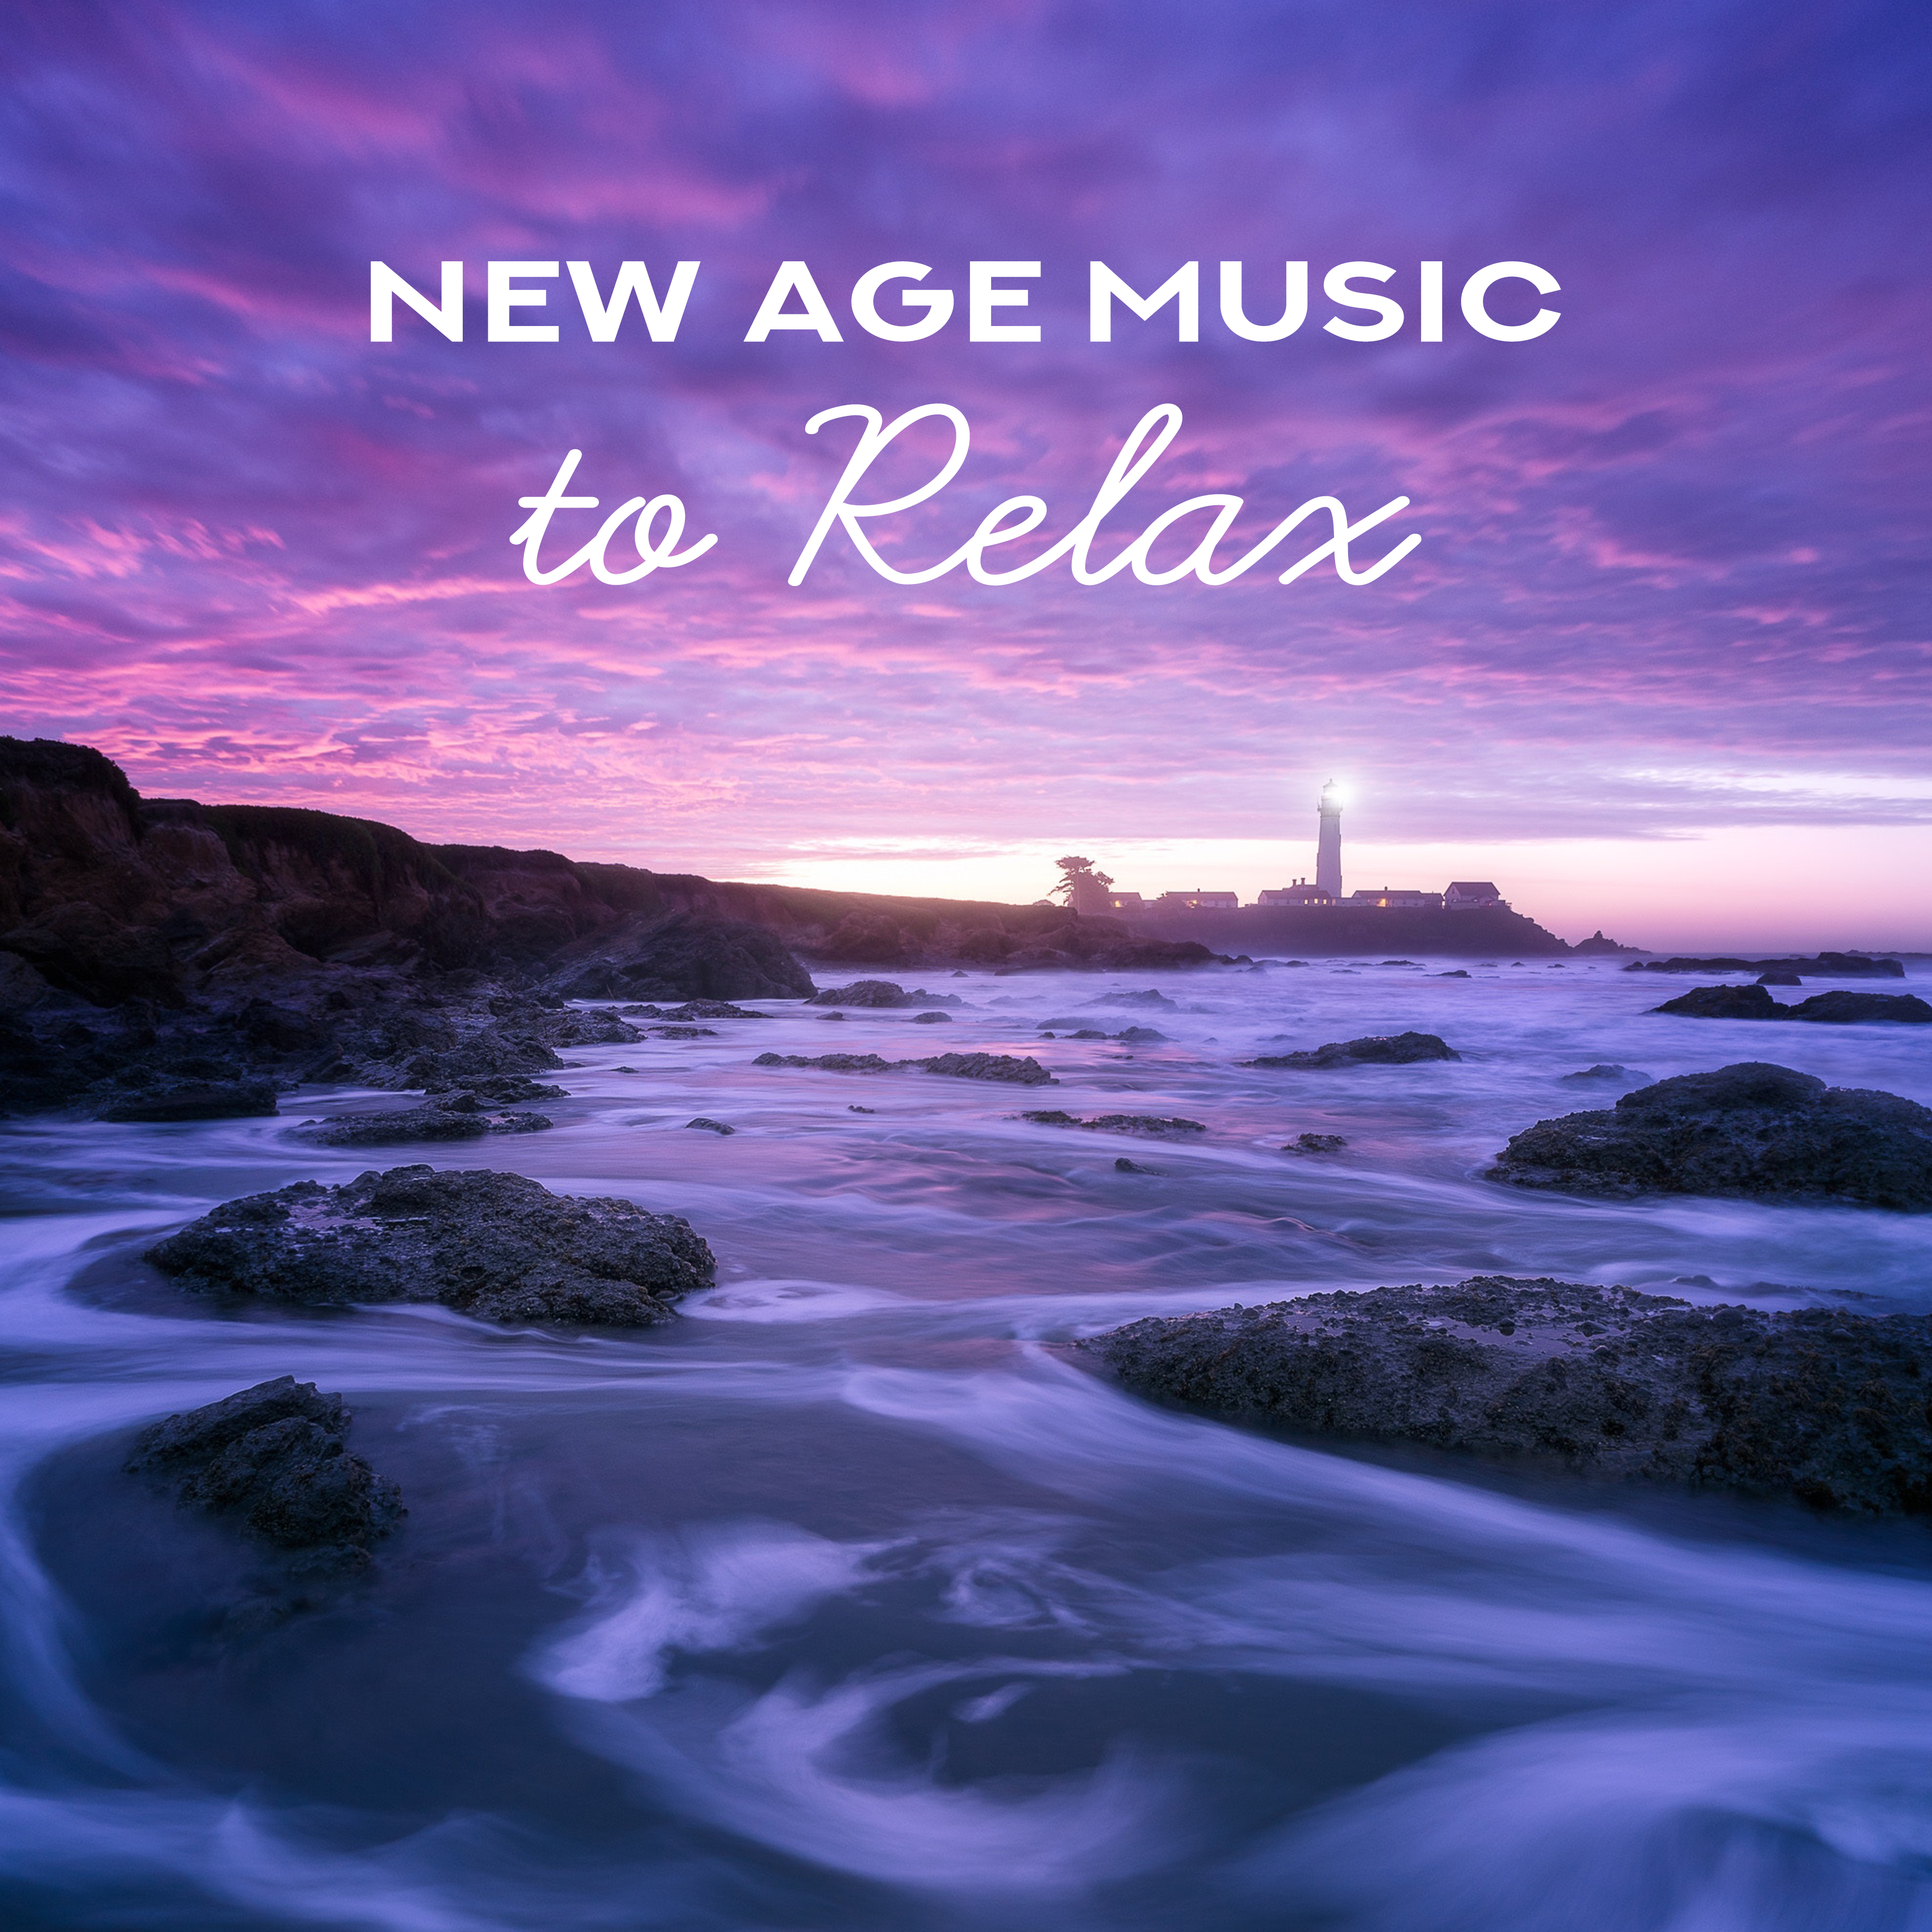 New Age Music to Relax